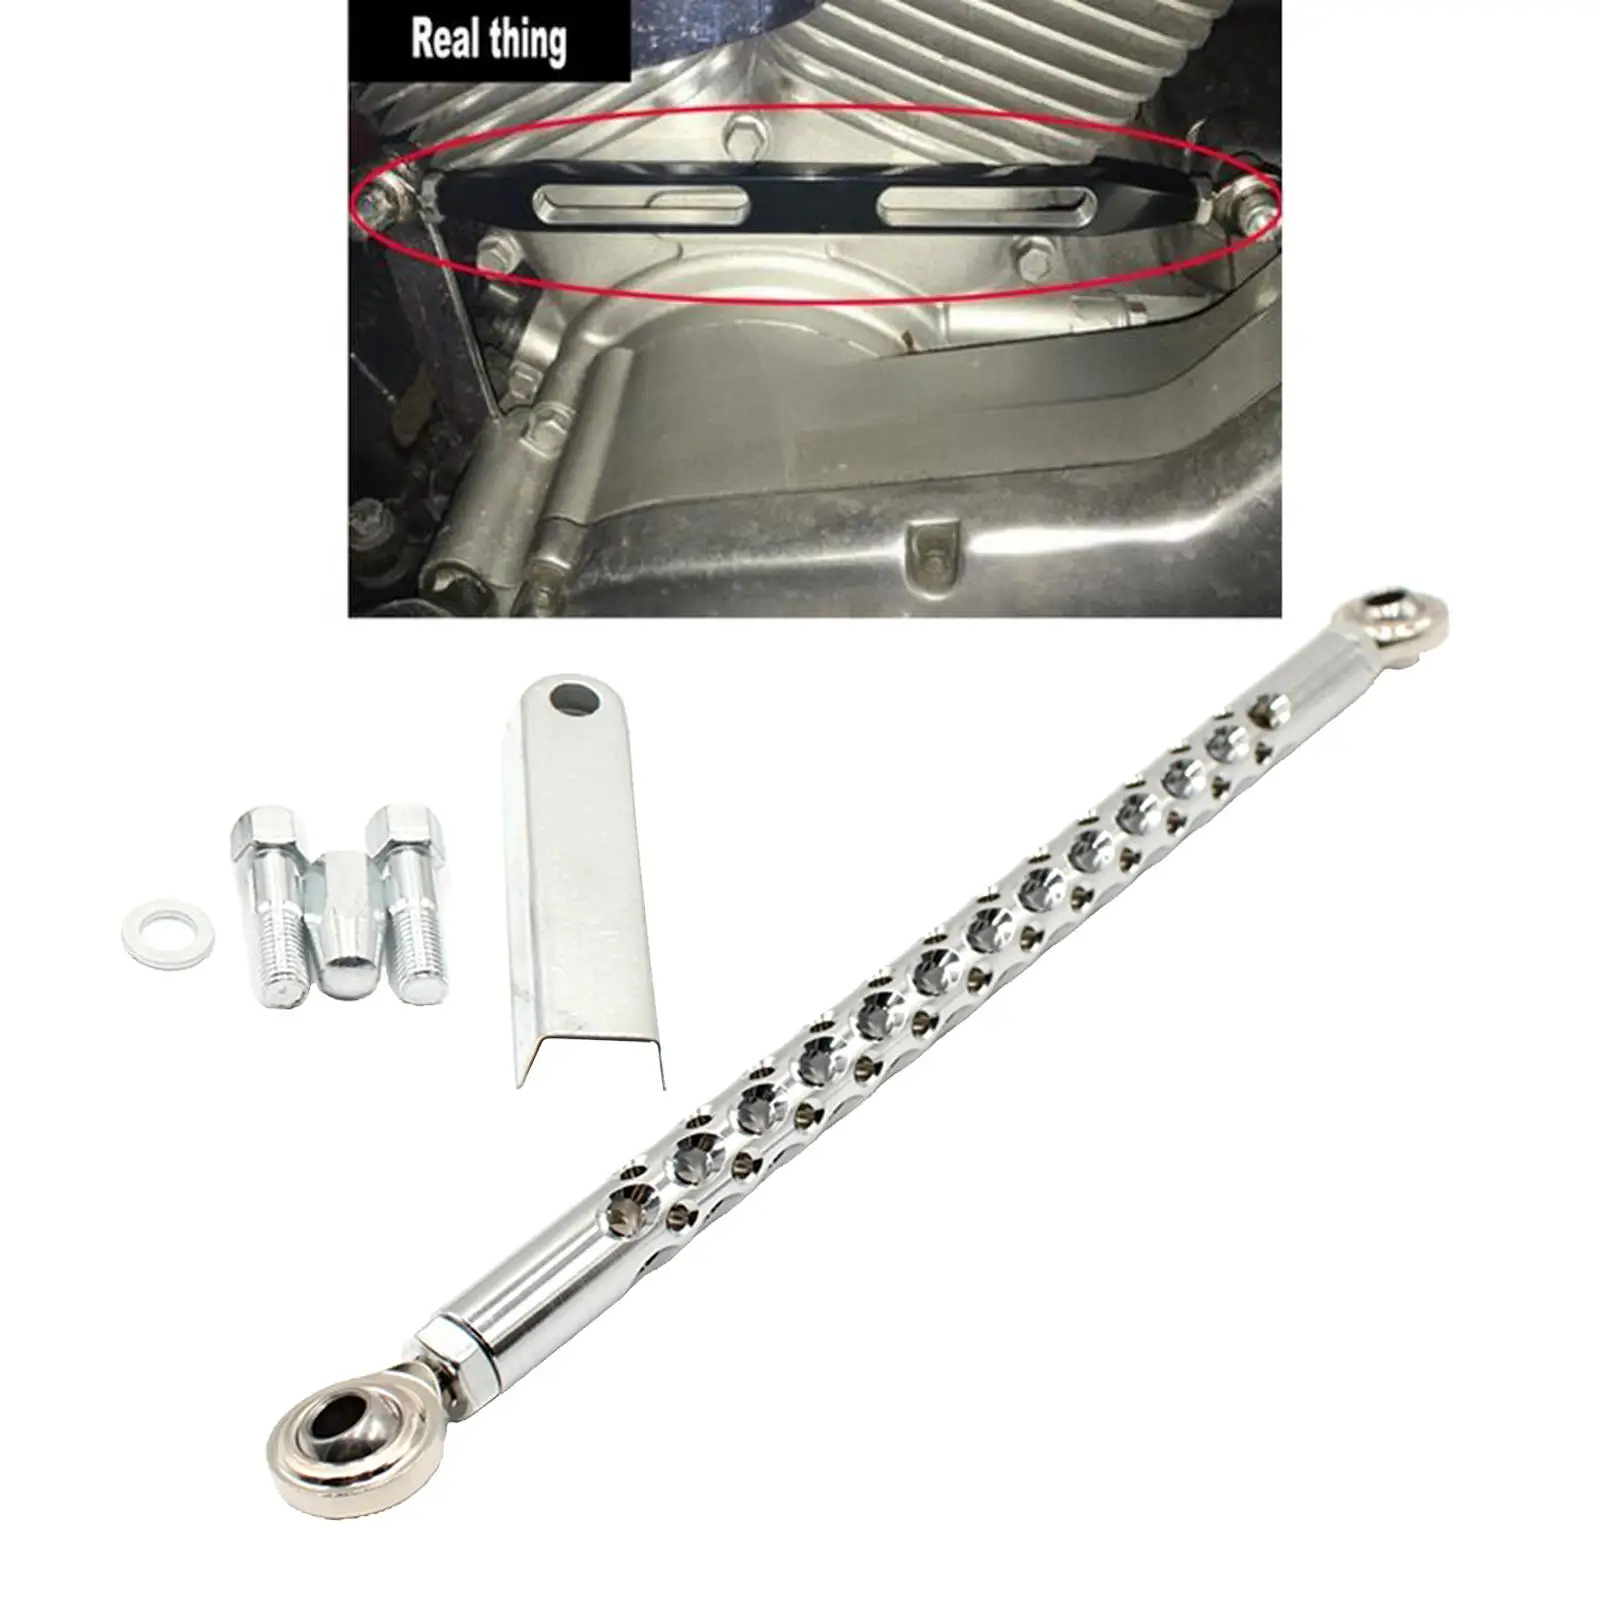 Motorcycle CNC Gear  Lever  Linkage er Billet Aluminum for  the way  at 986-2014